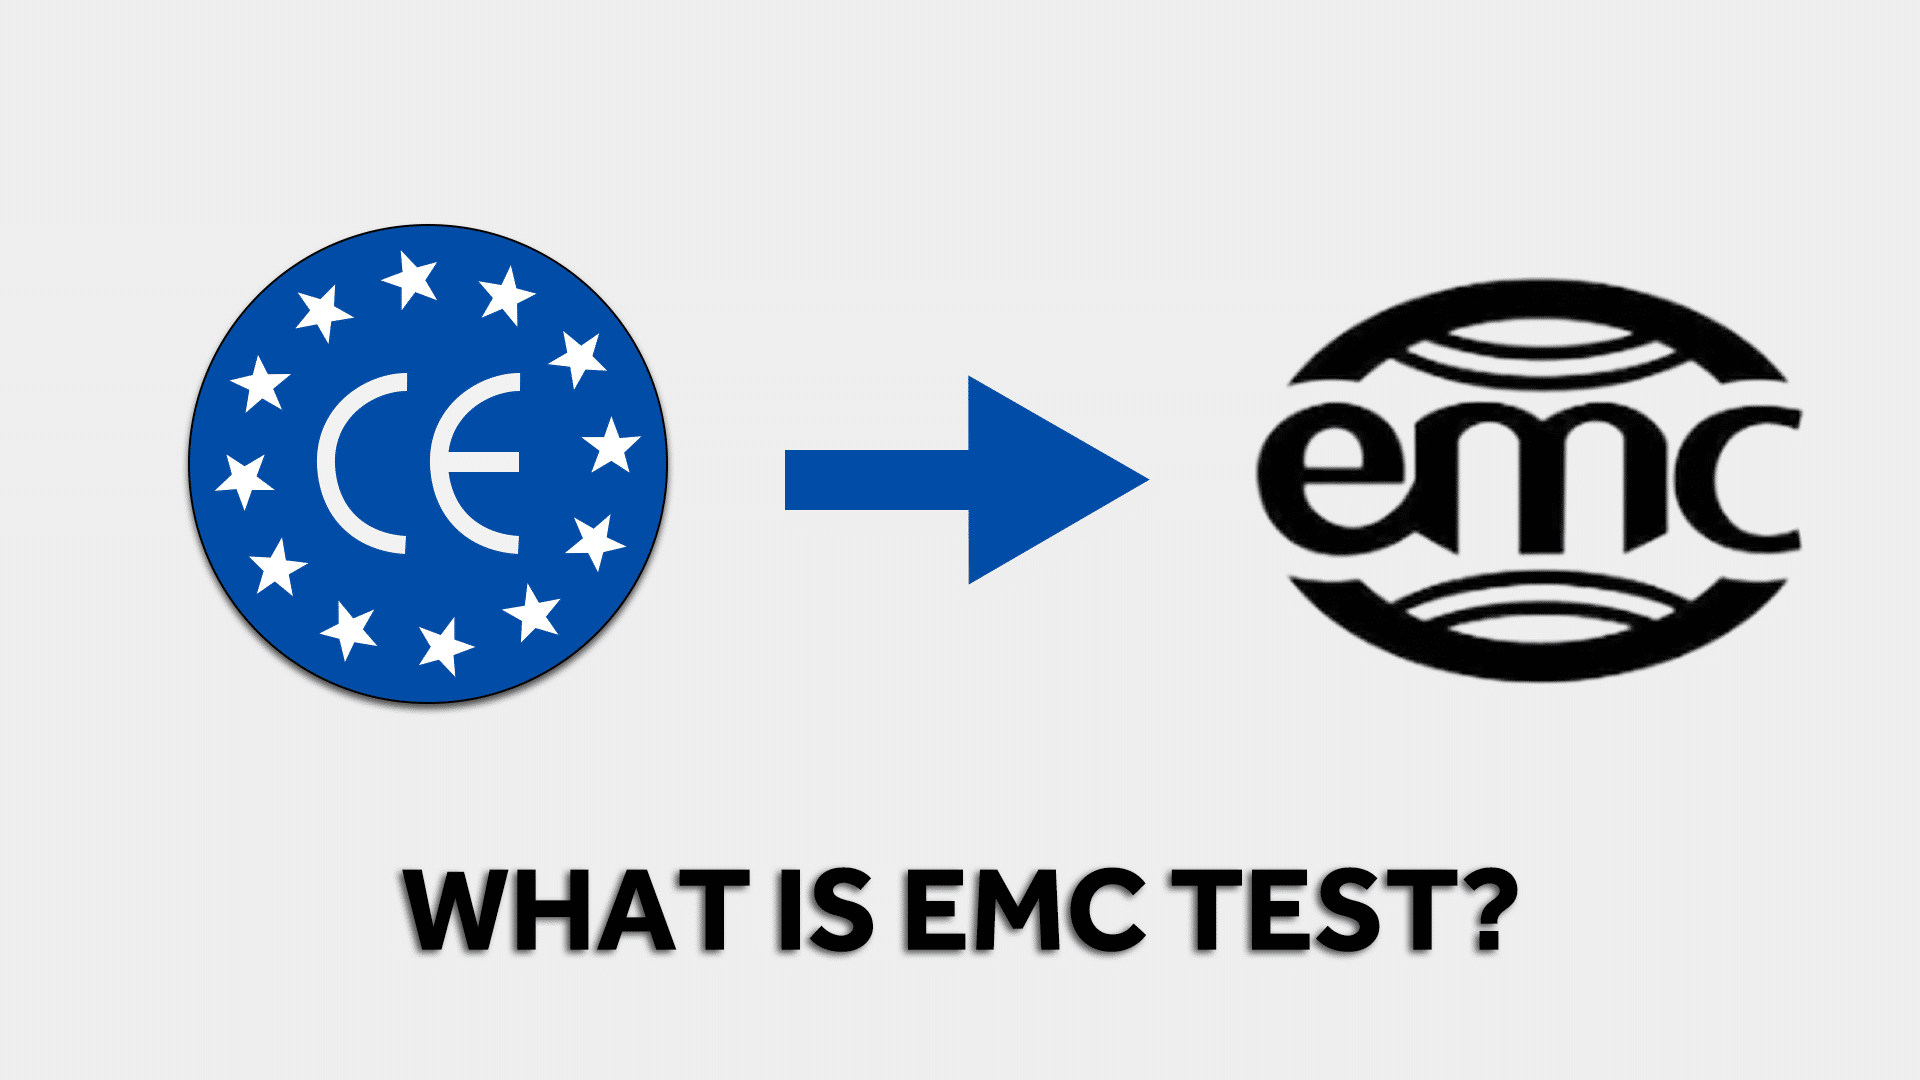 What is EMC test